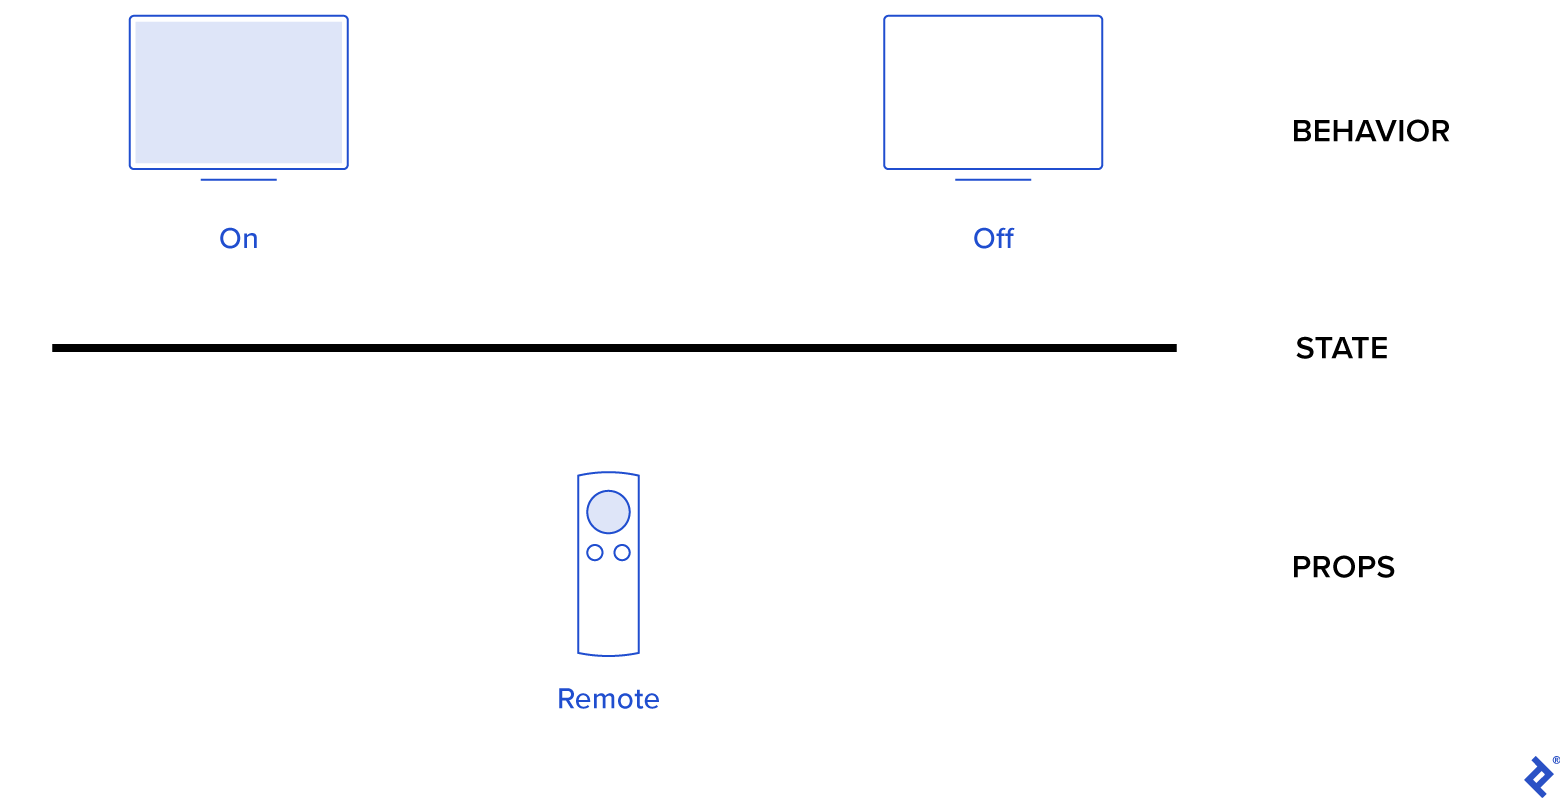 Two TV sets at the top, one is on, one is off (labeled Behavior) are above a line labeled State, and a remote controller labeled Props.